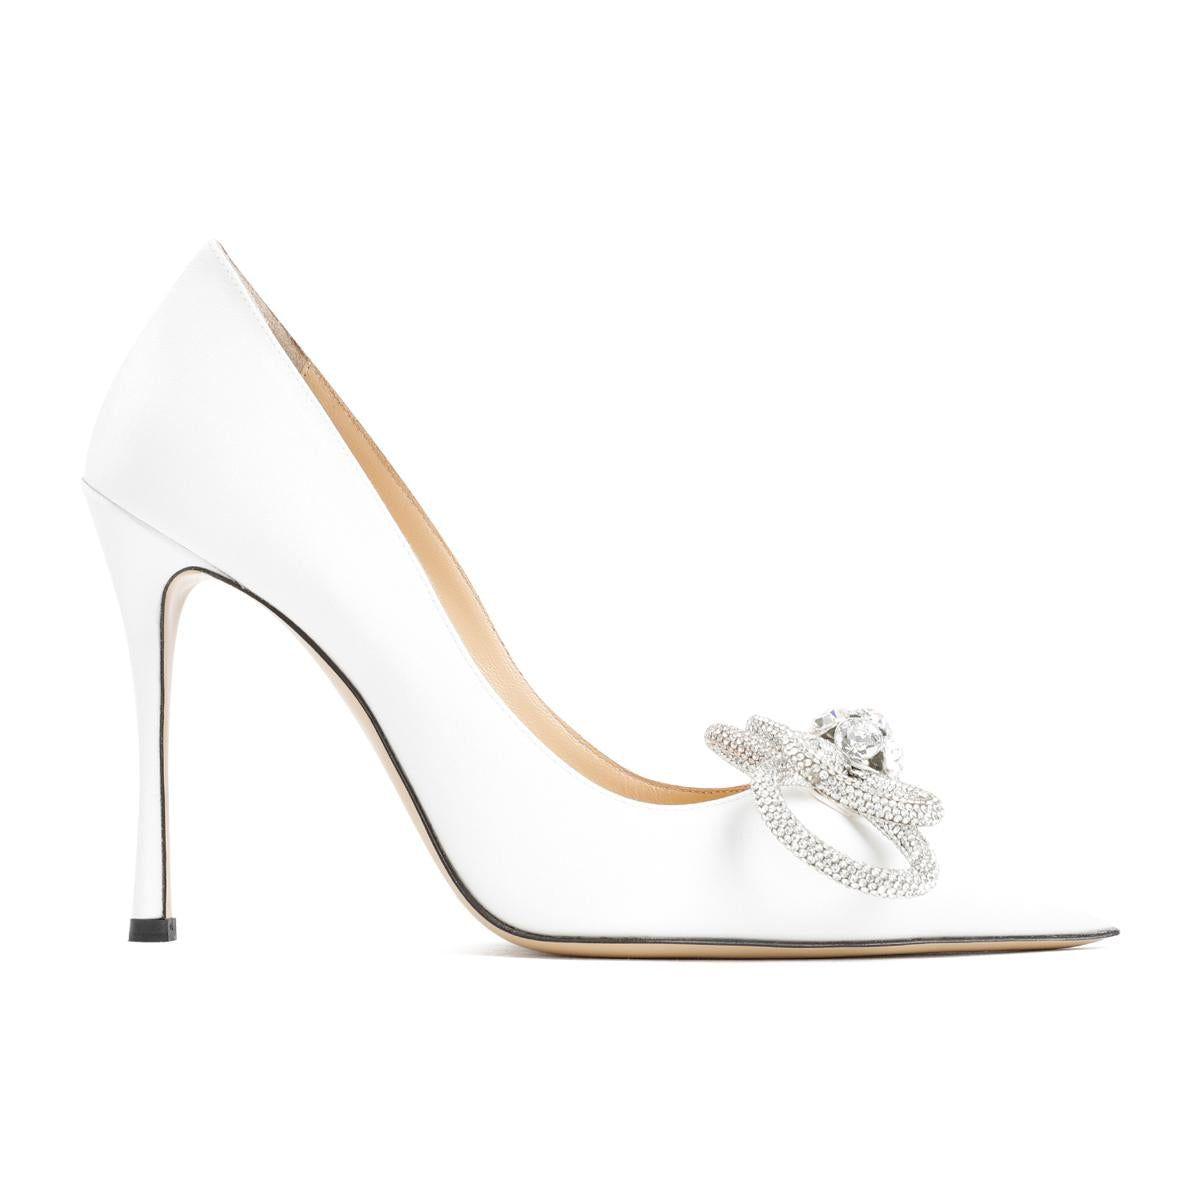 Mach & Mach Double Bow High Heels Shoes in White | Lyst